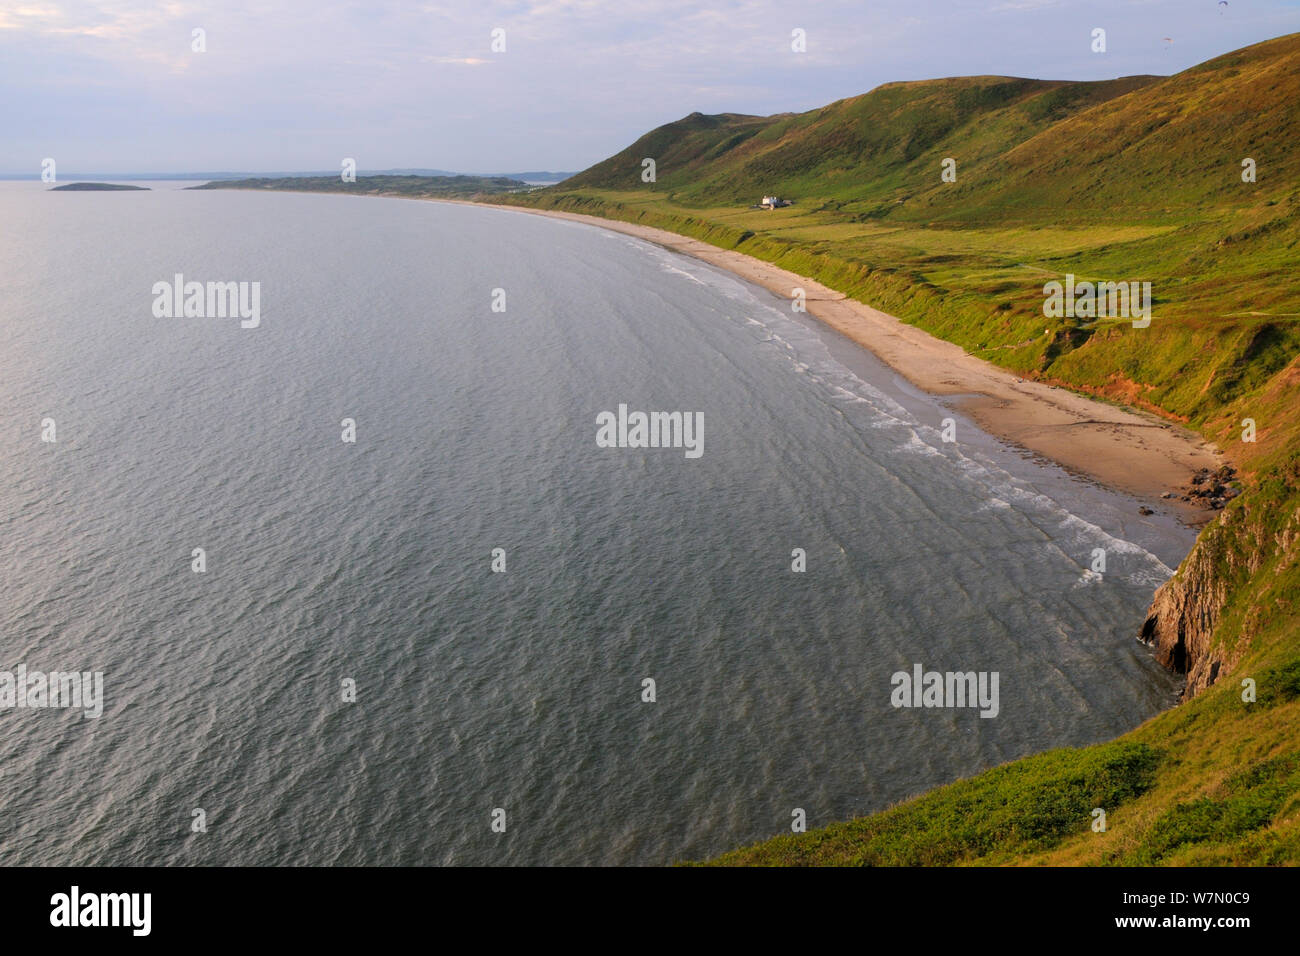 Overview of Rhossili Bay at high tide with waves lapping sandy beach below Rhossili Down, The Gower peninsula, Wales, UK, July. Sequence 2 of 2 matching view with different tides Stock Photo